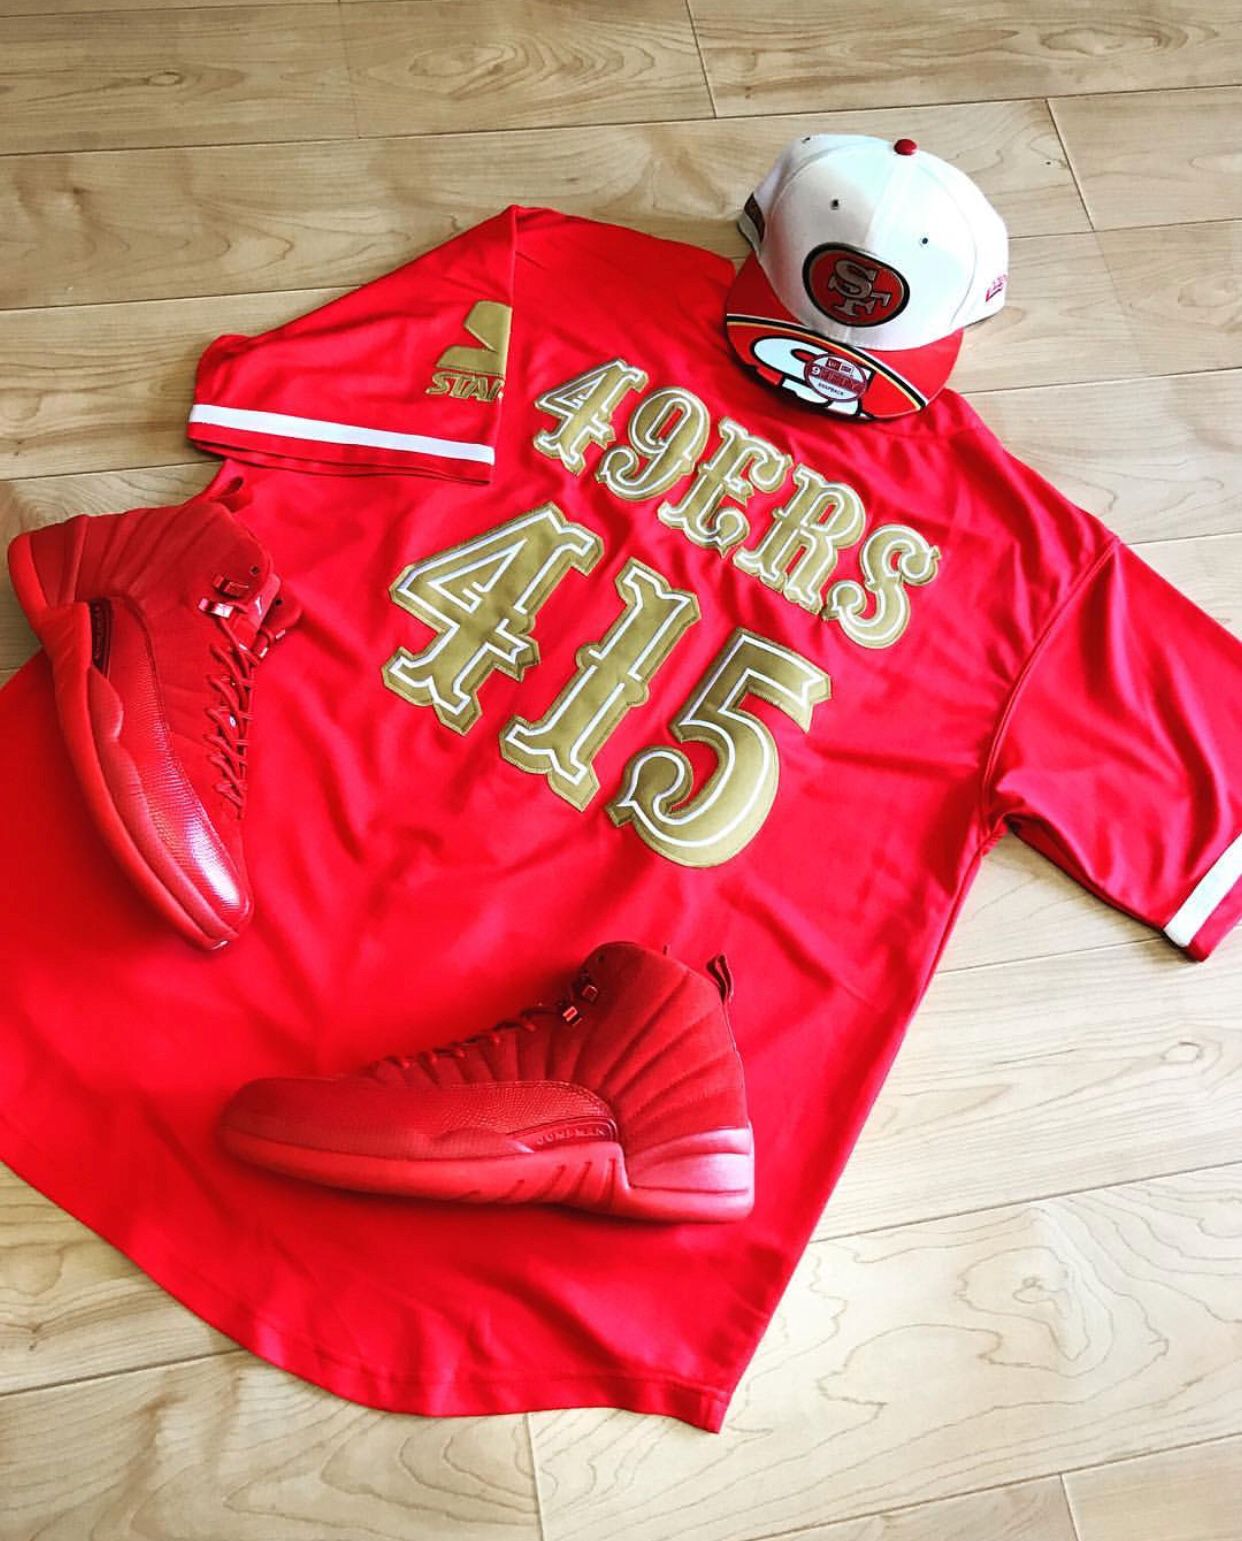 personalized 49ers jersey